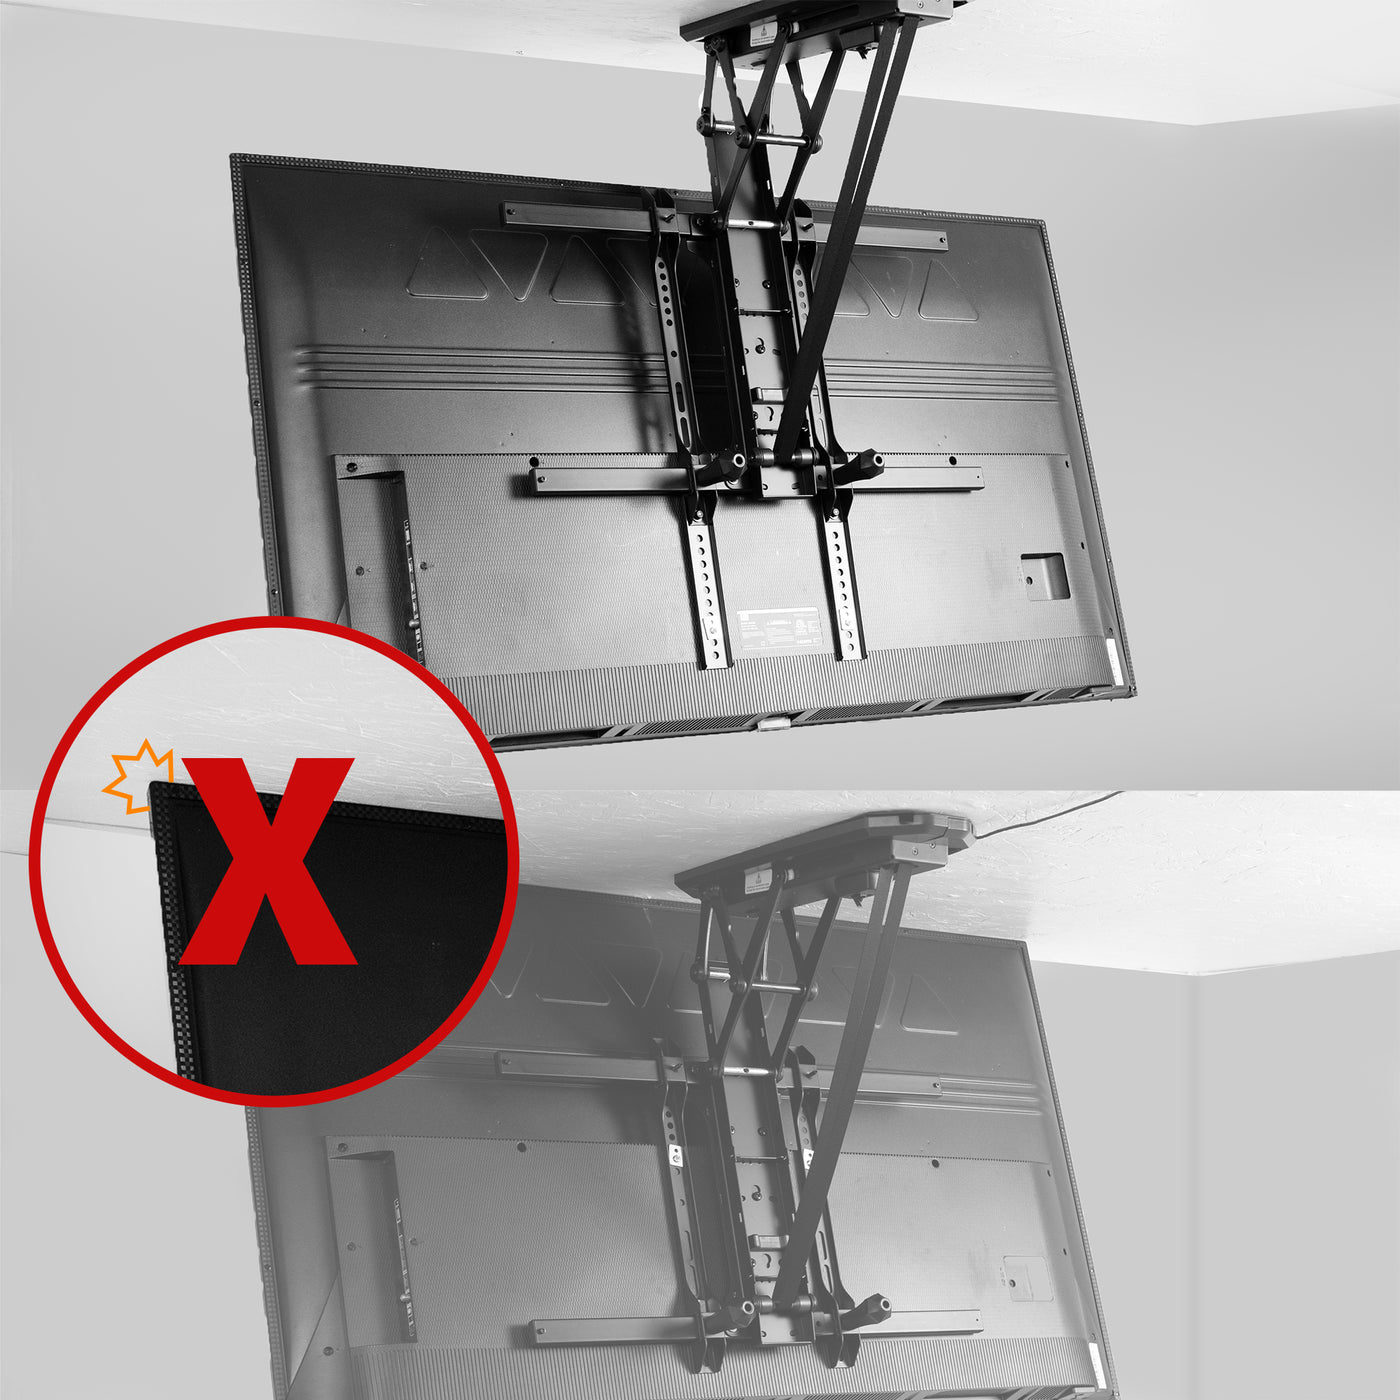 Protect your TV monitor from colliding with the ceiling with added brackets.